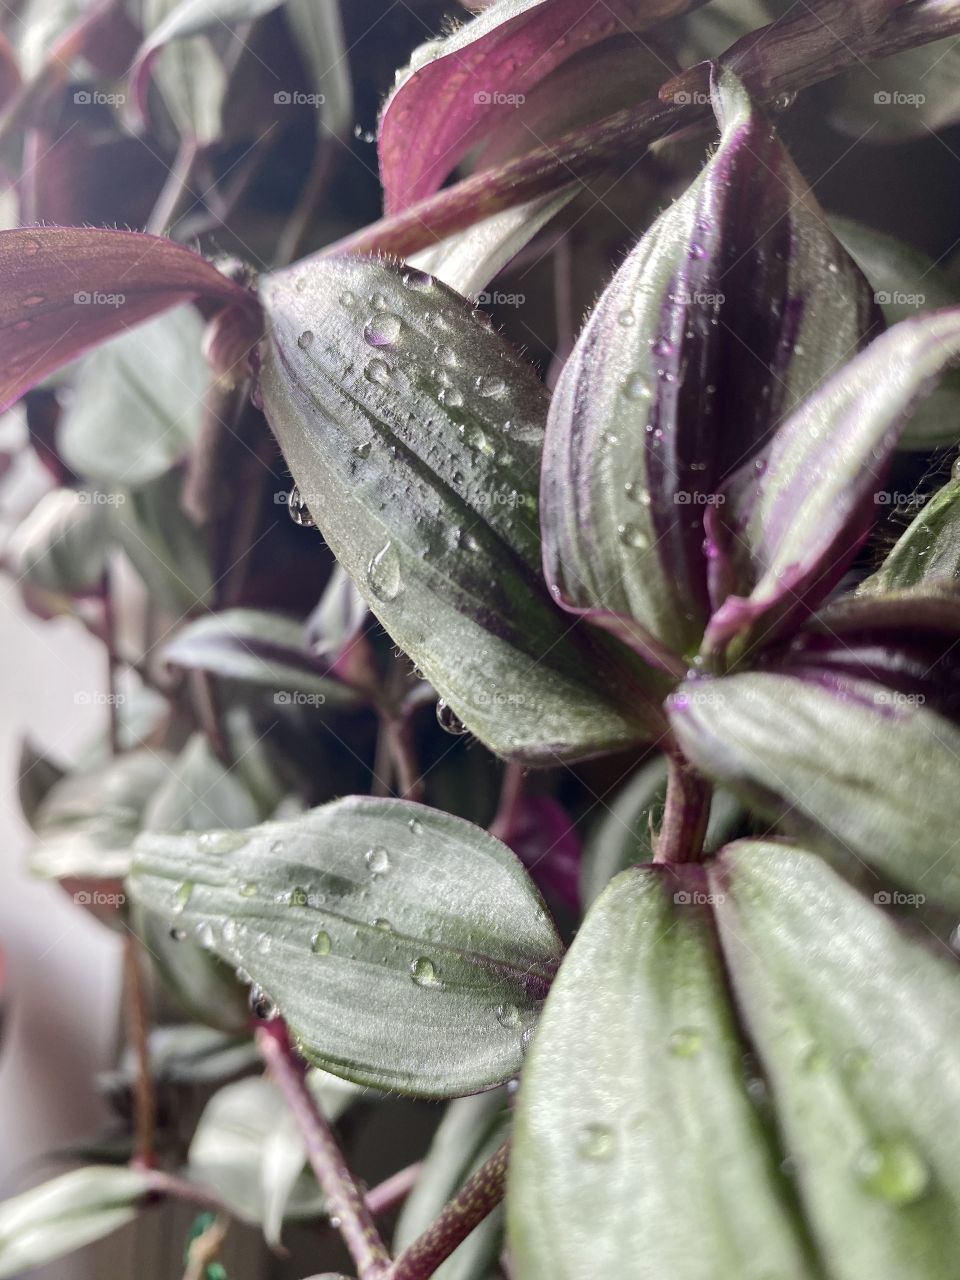 Just watered - Wandering Jew